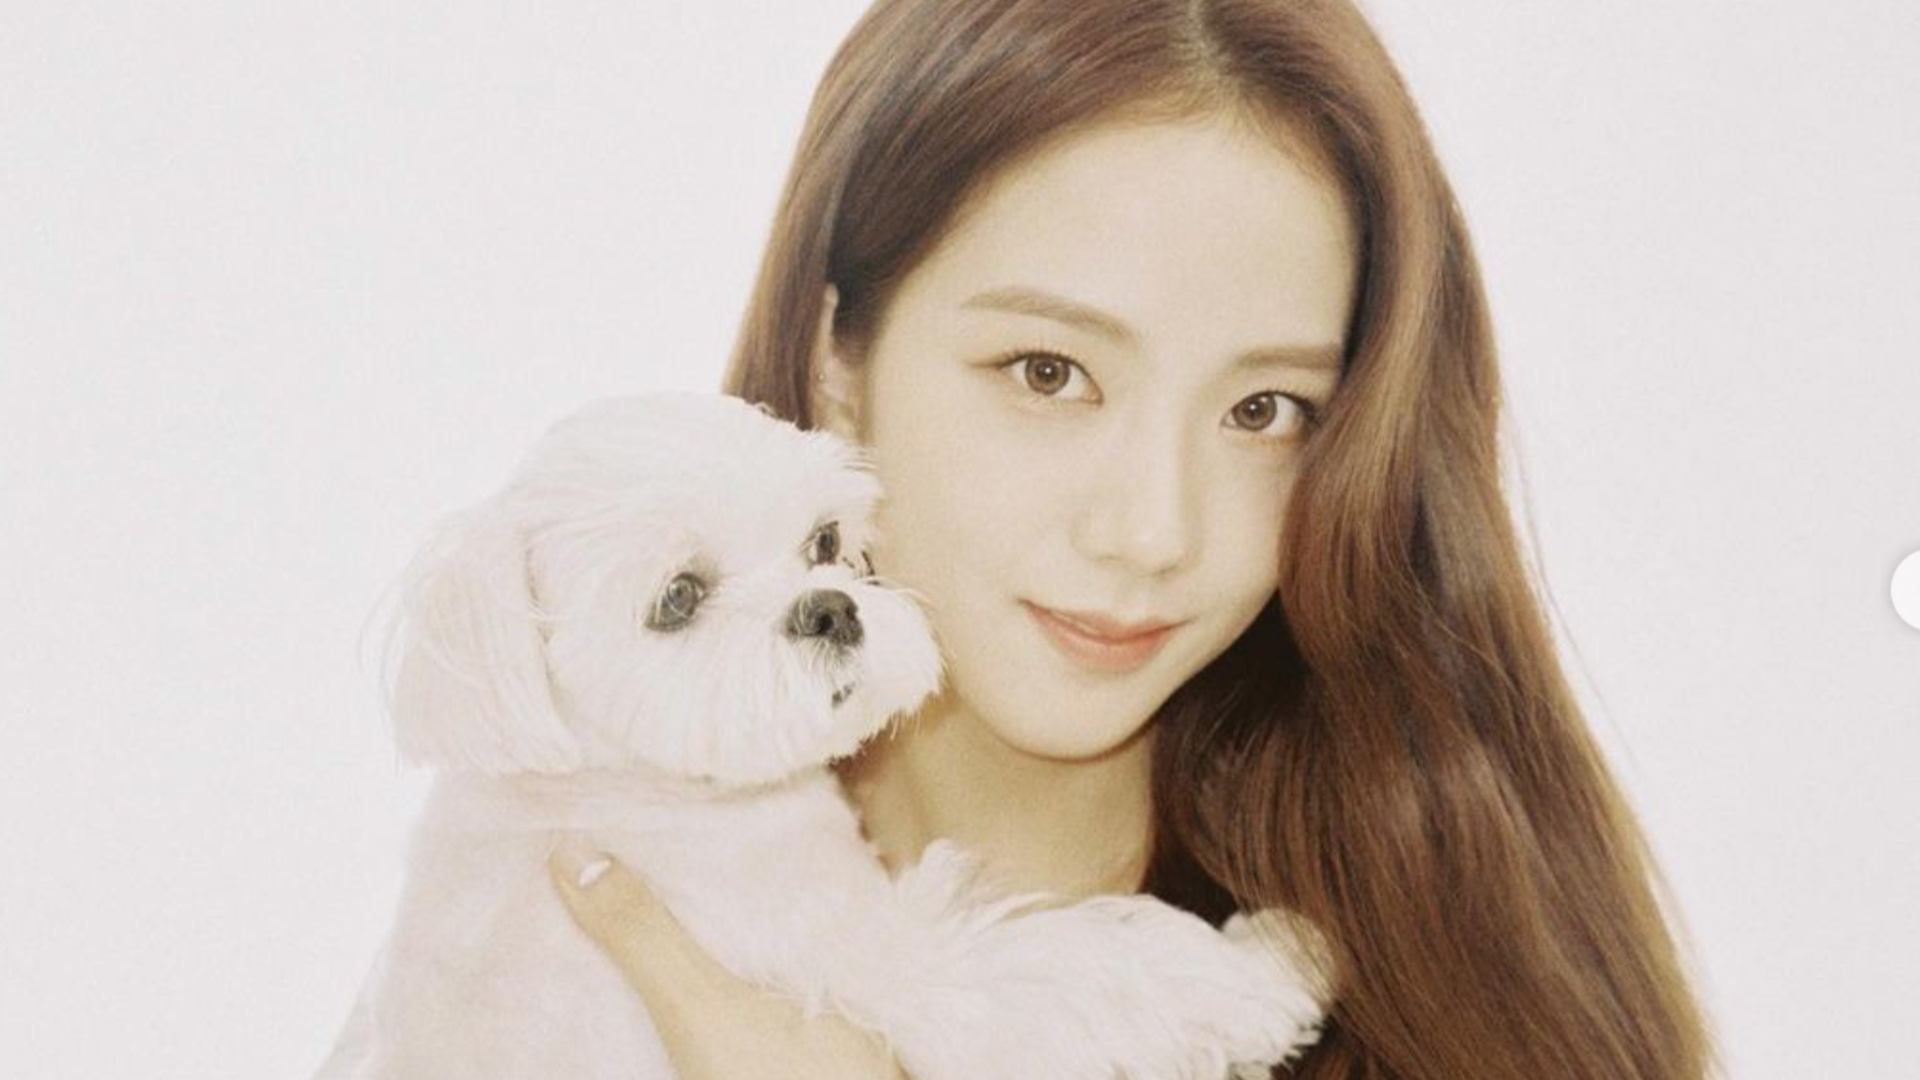 Jisoo with her pet dog